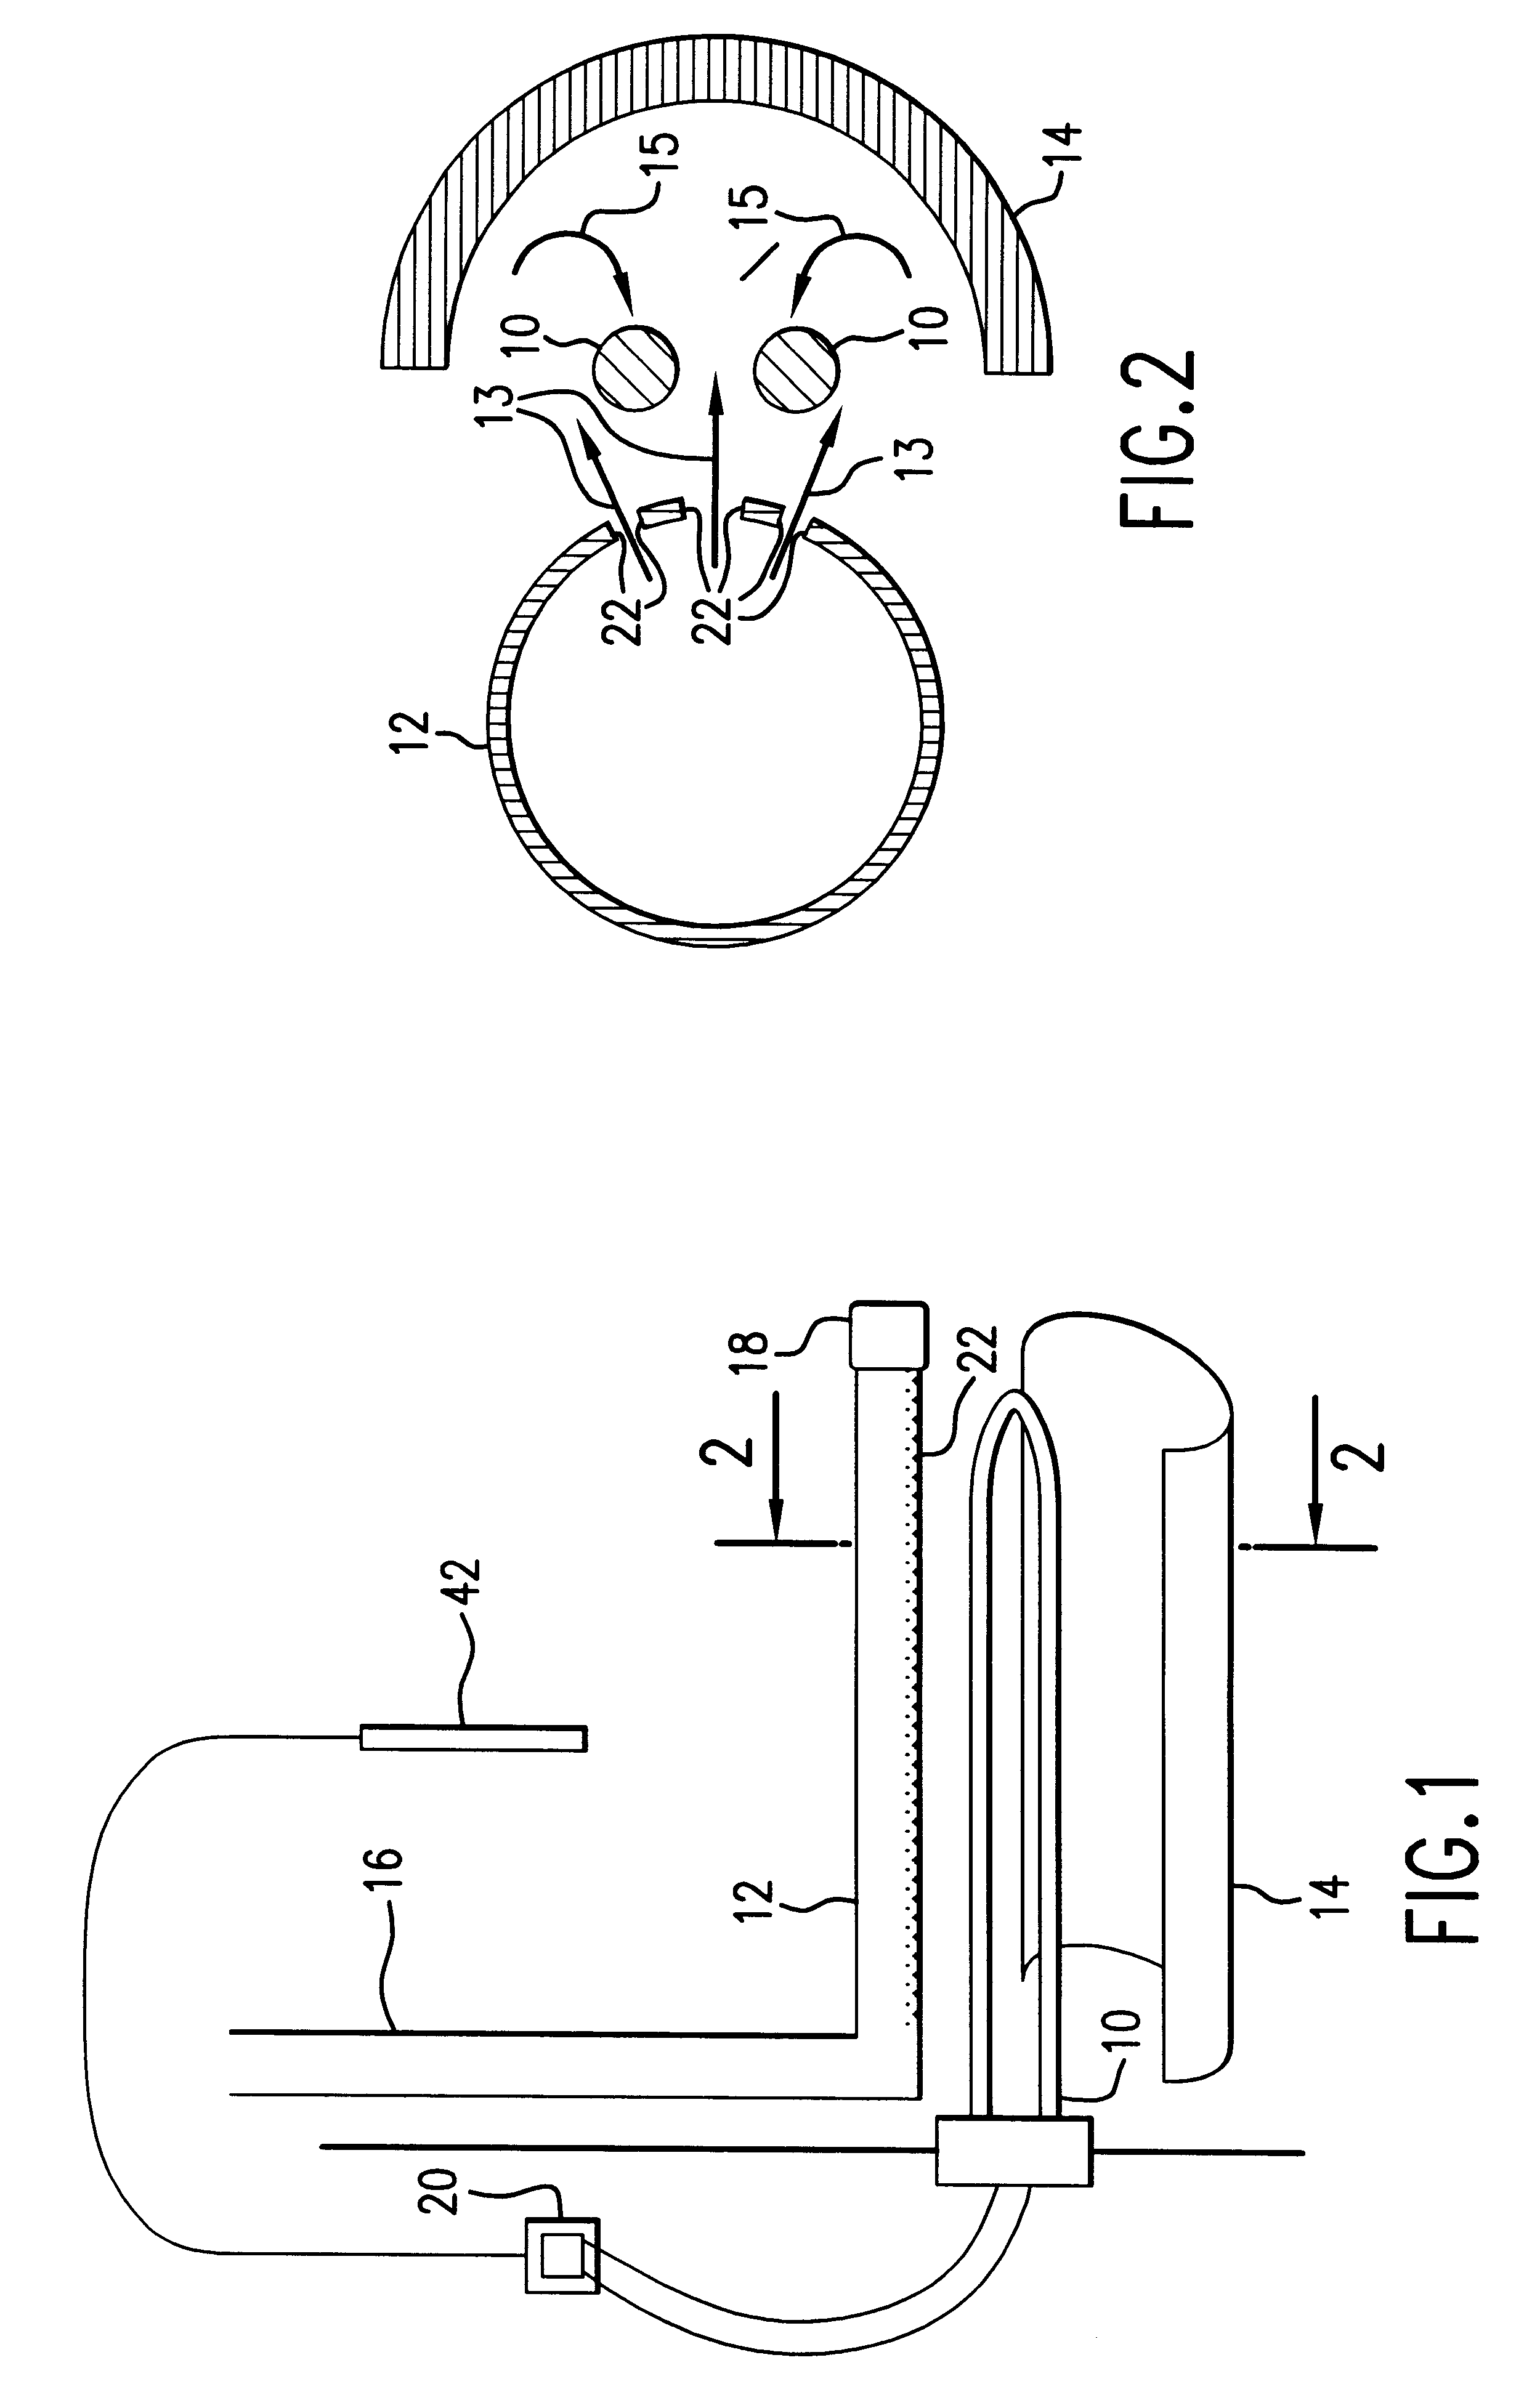 Method and apparatus for preventing scale buildup on electric heating elements